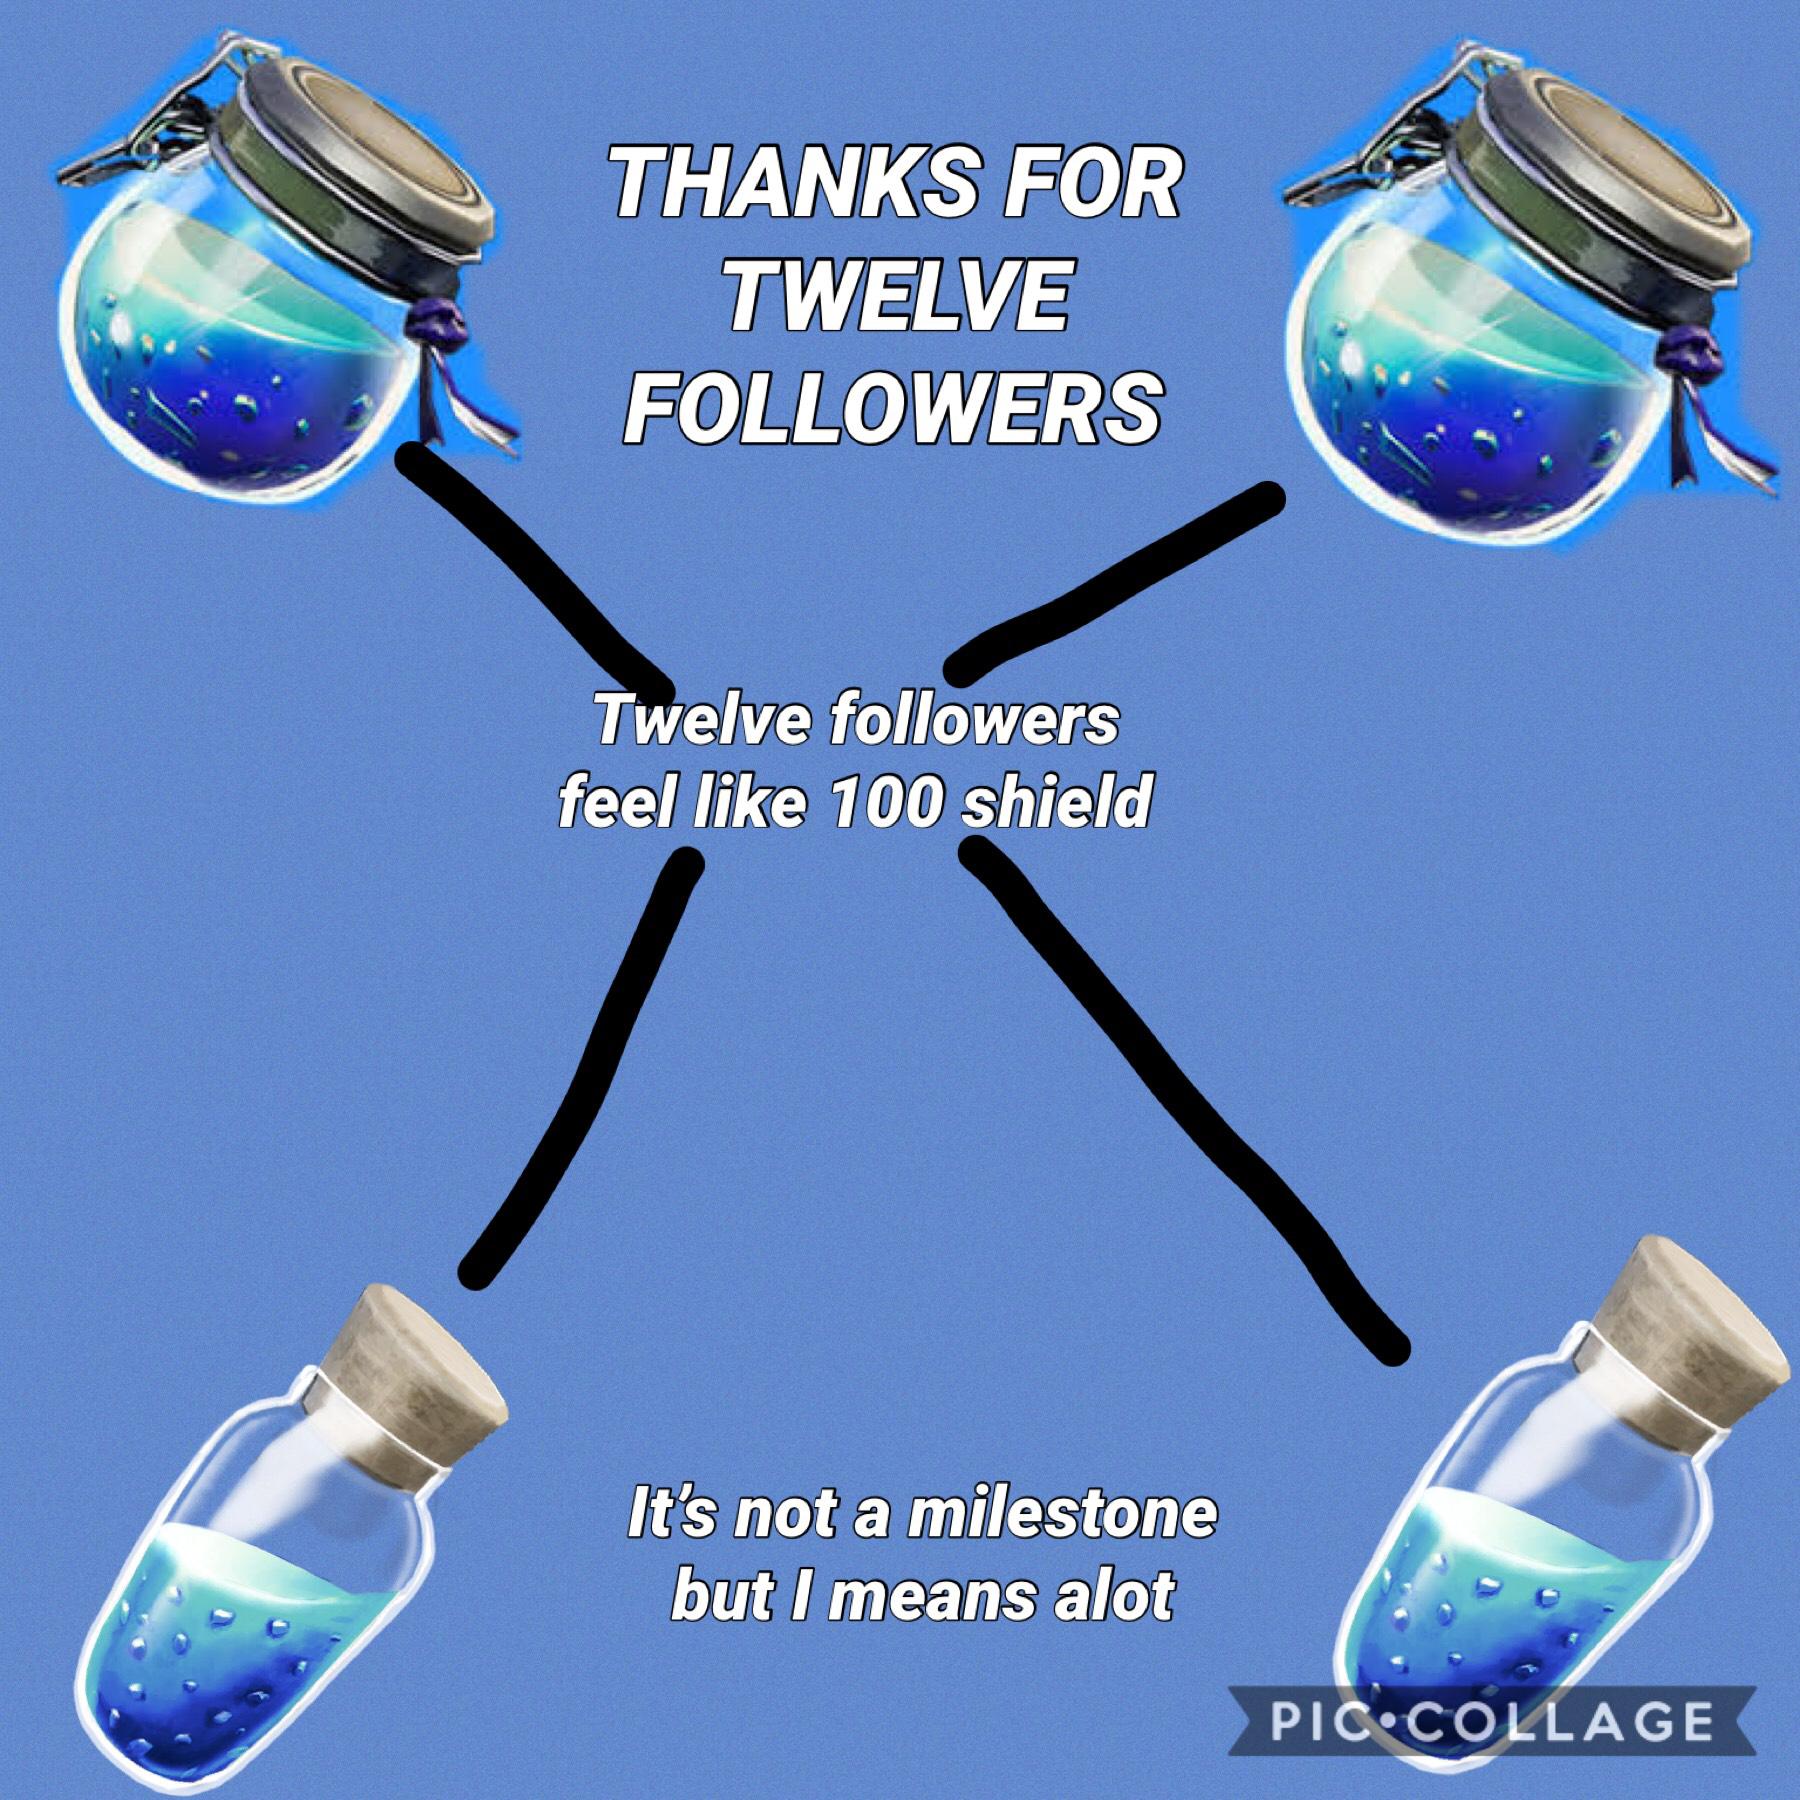 THANK YOU EVERYBODY